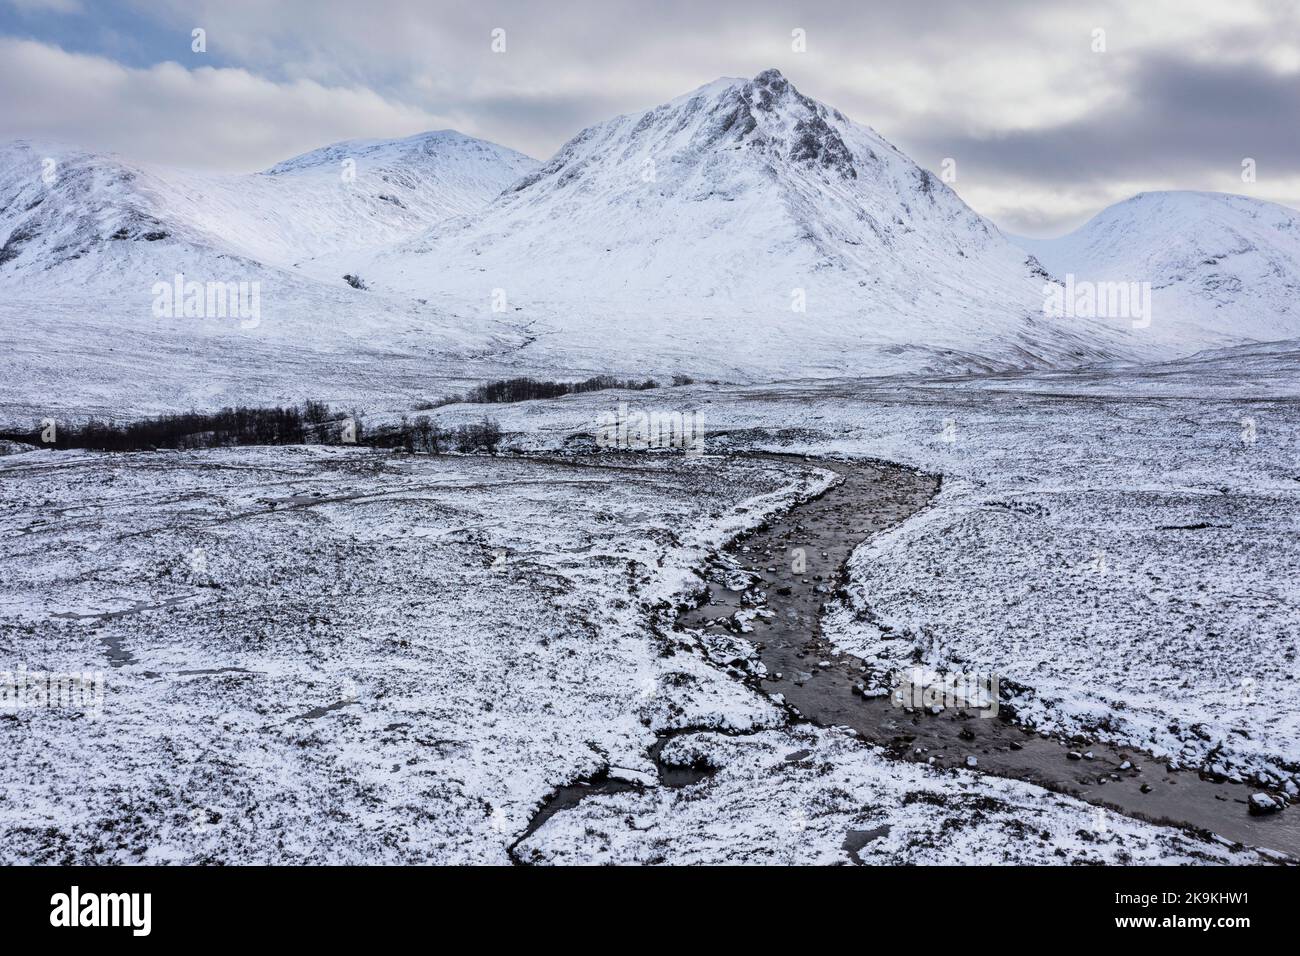 Stunning aerial drone landscape image of Stob Dearg and Glencoe in Scottish Highlands during deep snowfall and beautiful blue skies Stock Photo